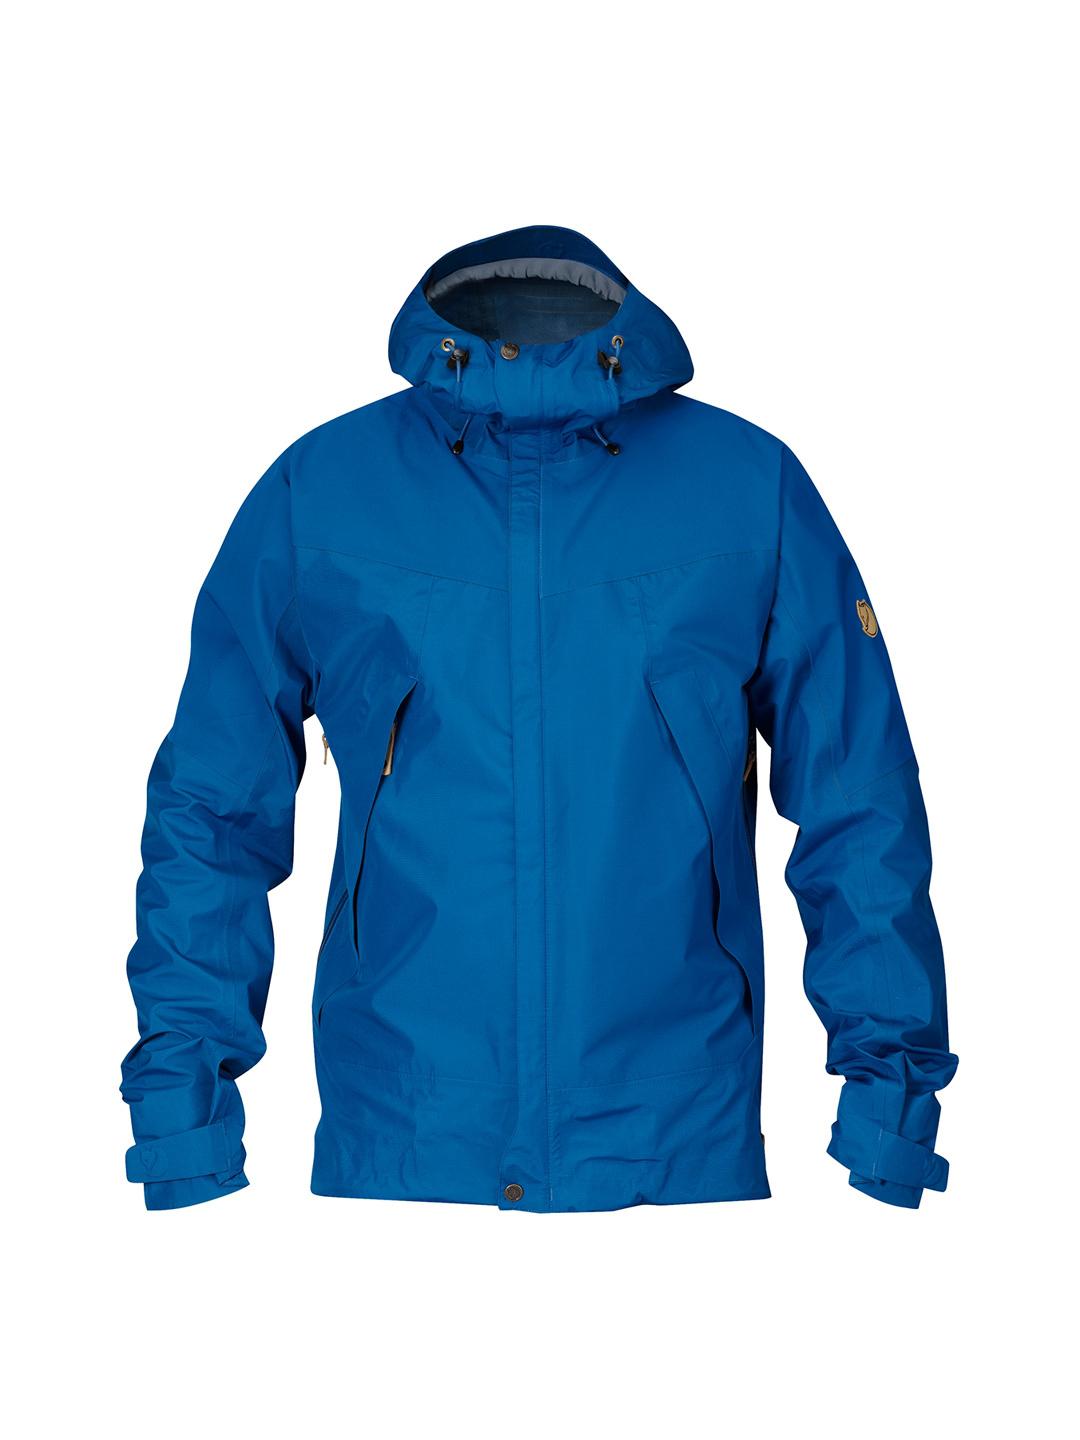 Fjallraven Leather Eco-trail Jacket in Blue for Men - Lyst